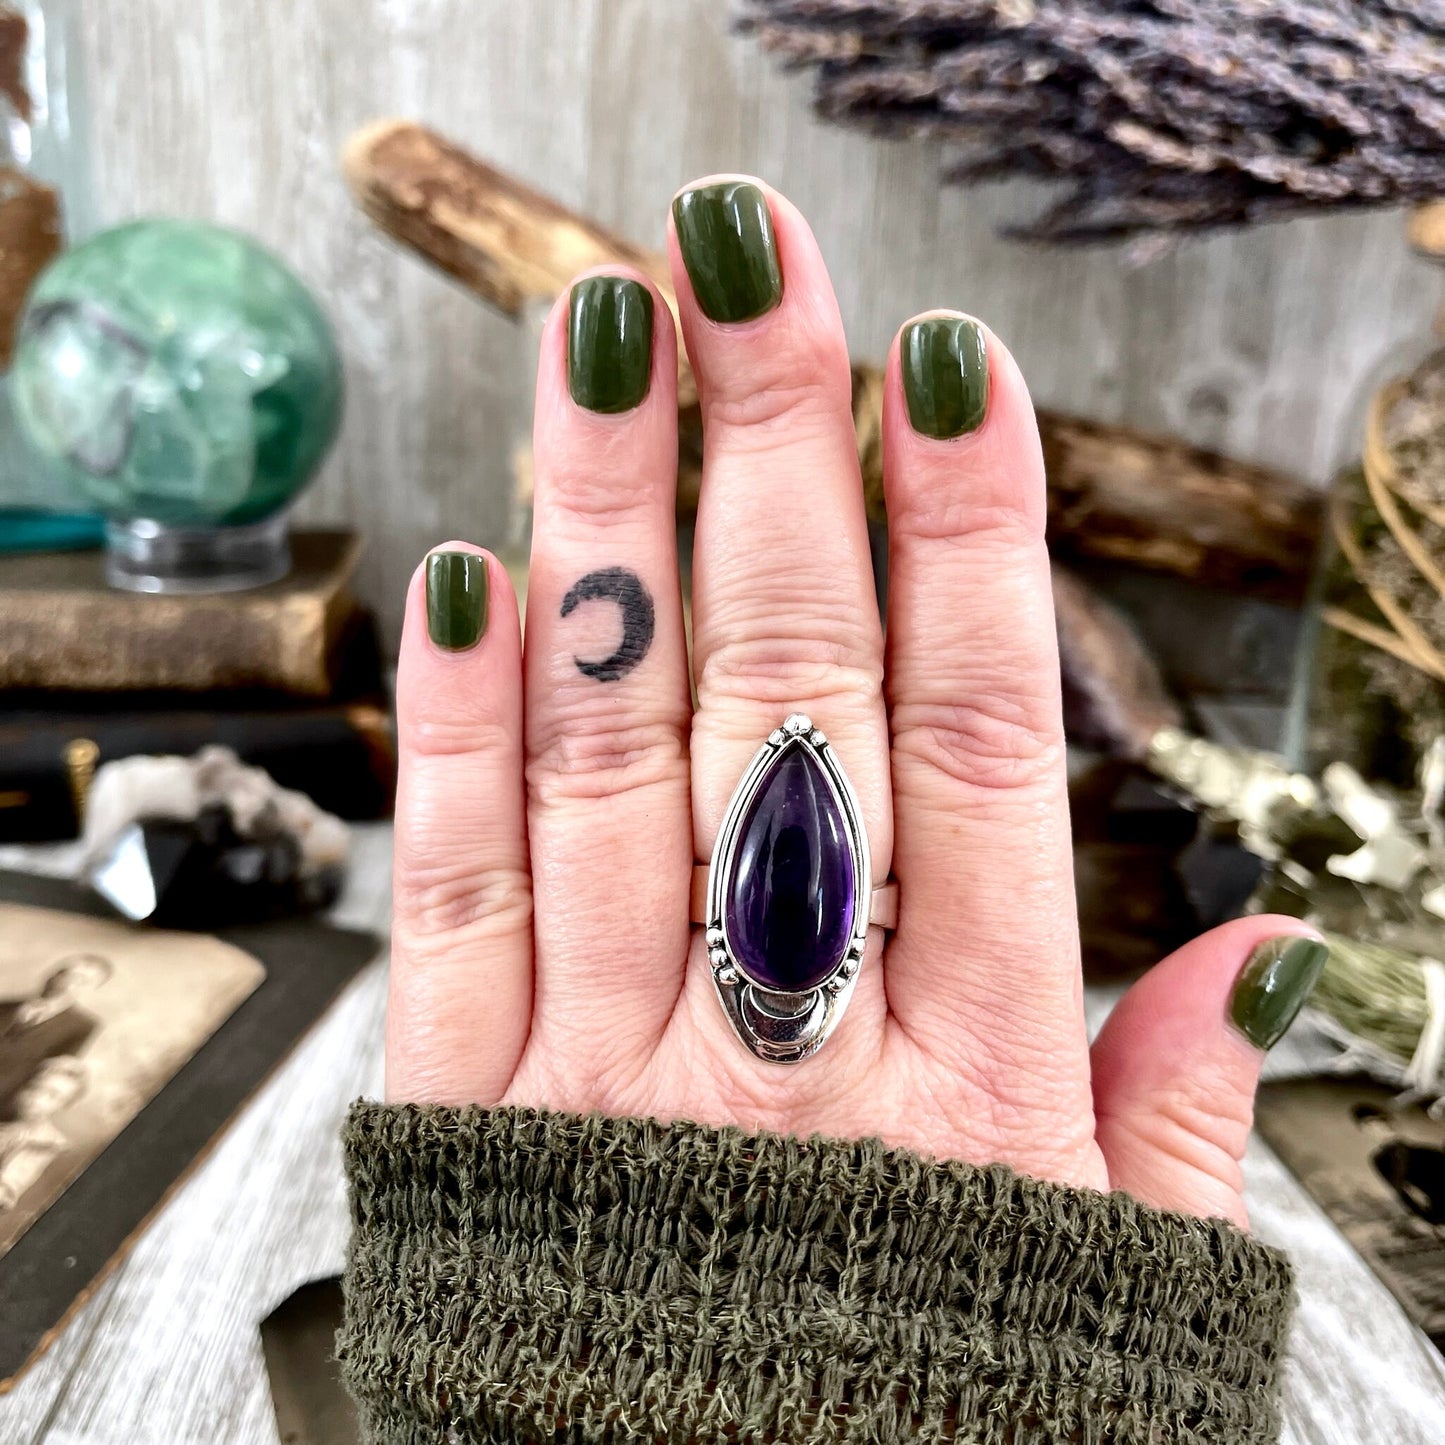 Midnight Moon Amethyst Teardrop Crystal Ring in Solid Sterling Silver- Designed by FOXLARK Collection Adjustable to Size 6 7 8 9 / Purple